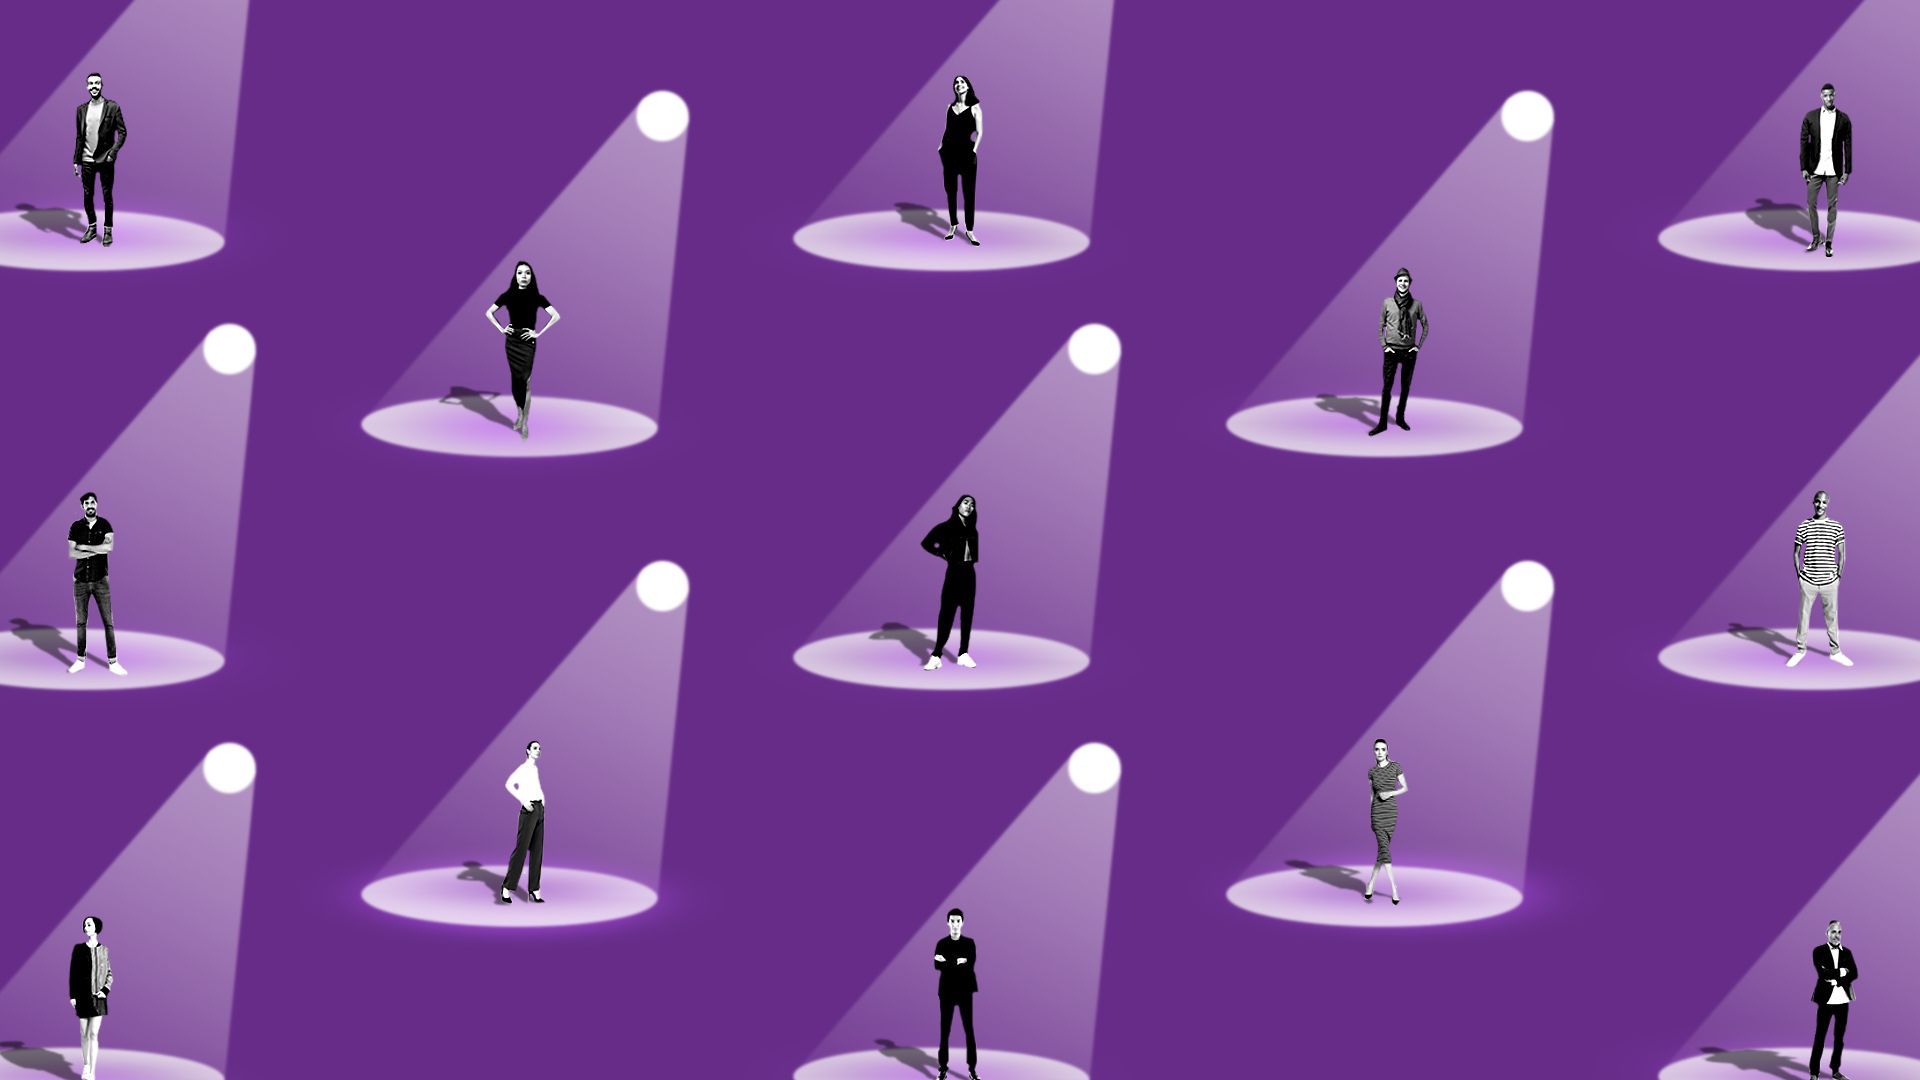 Illustration of a pattern made up of people under spotlights.